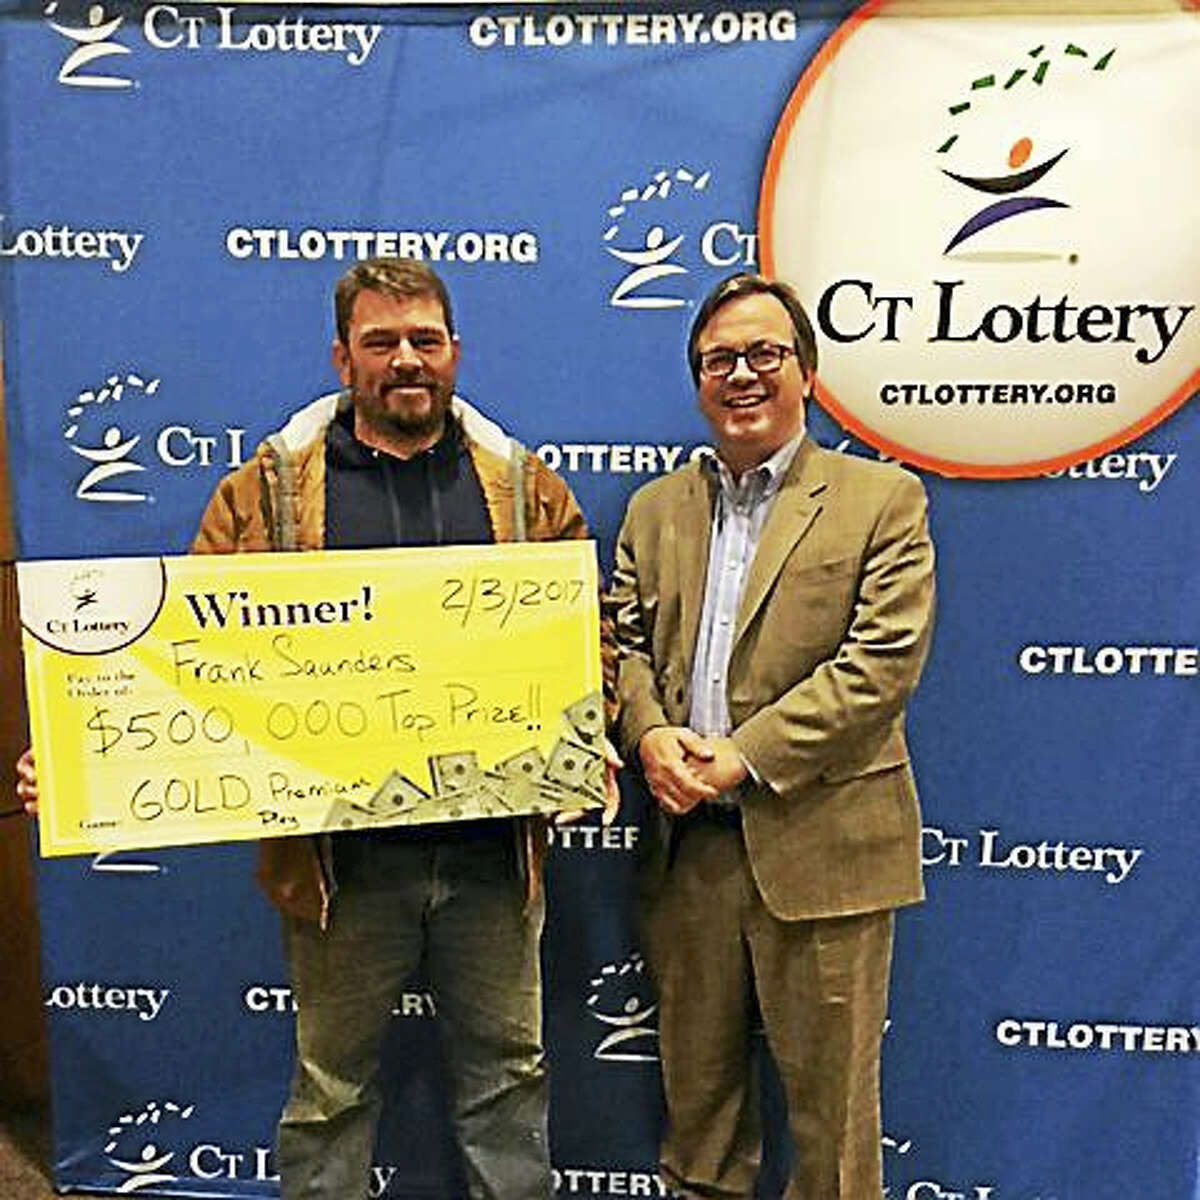 Frank Saunders of Old Saybrook claims his Gold Premium Play top prize in the Connecticut Lottery.